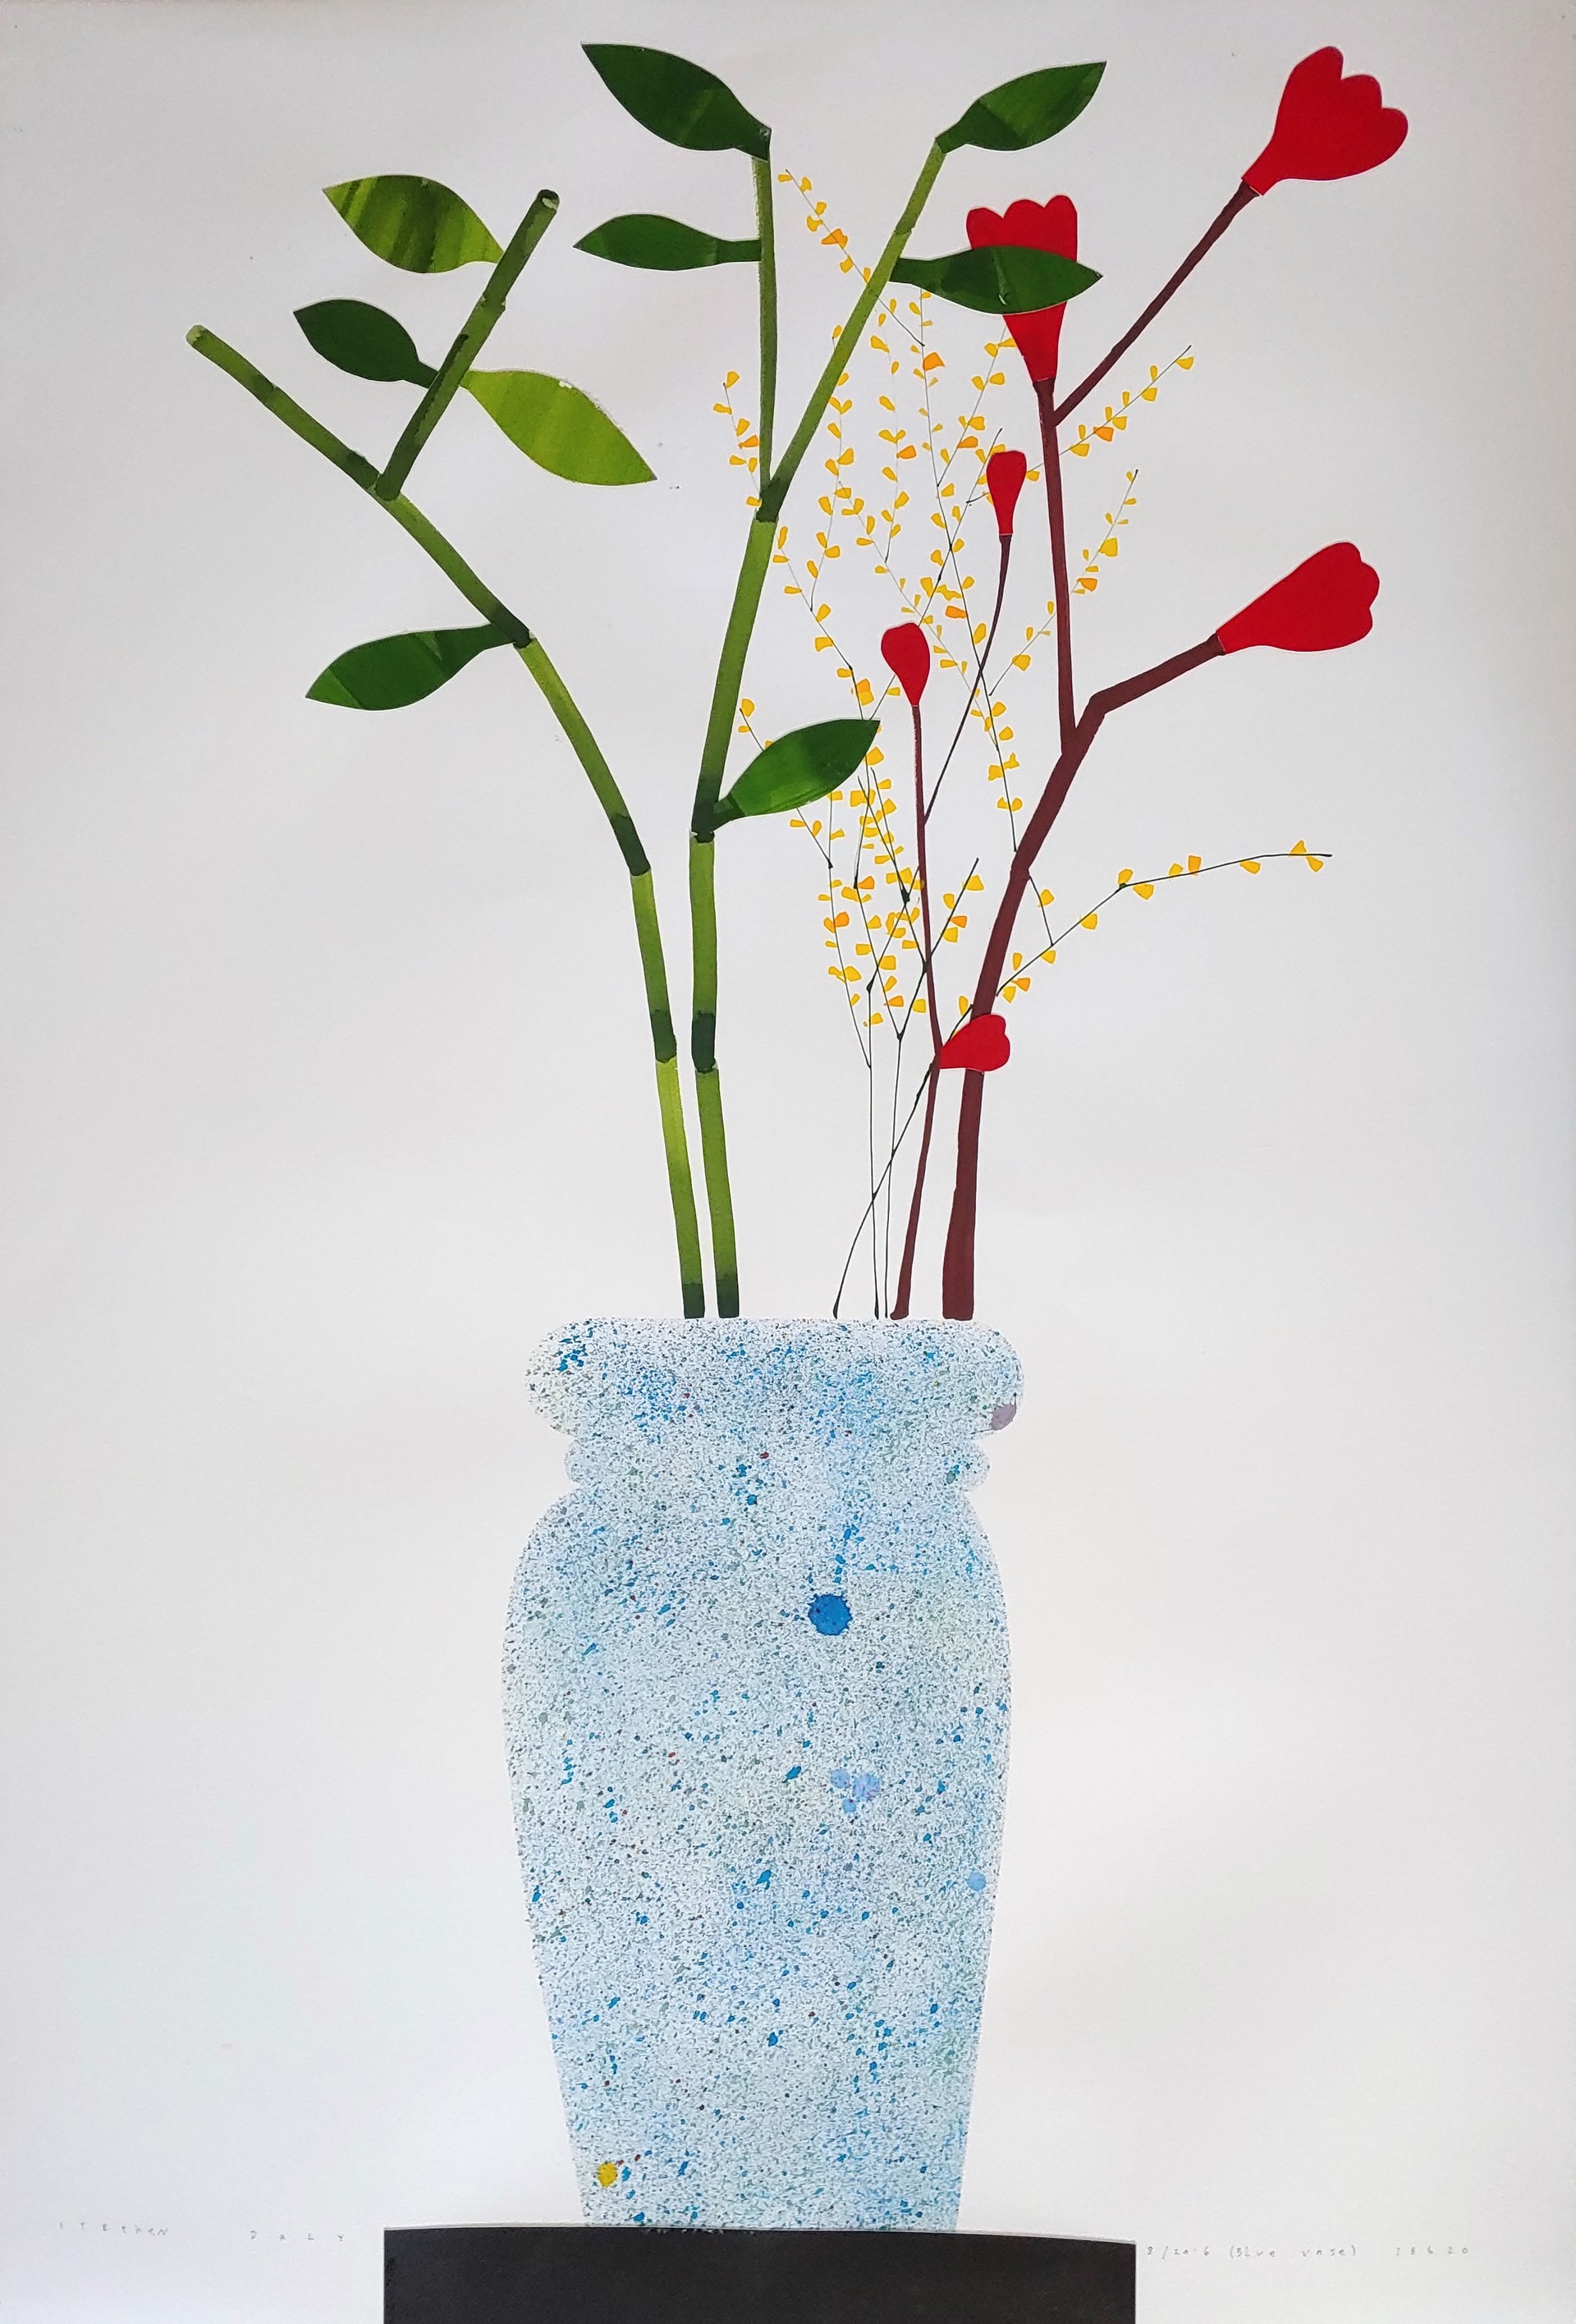 8/20: 6 (Blue vase) by Stephen Daly